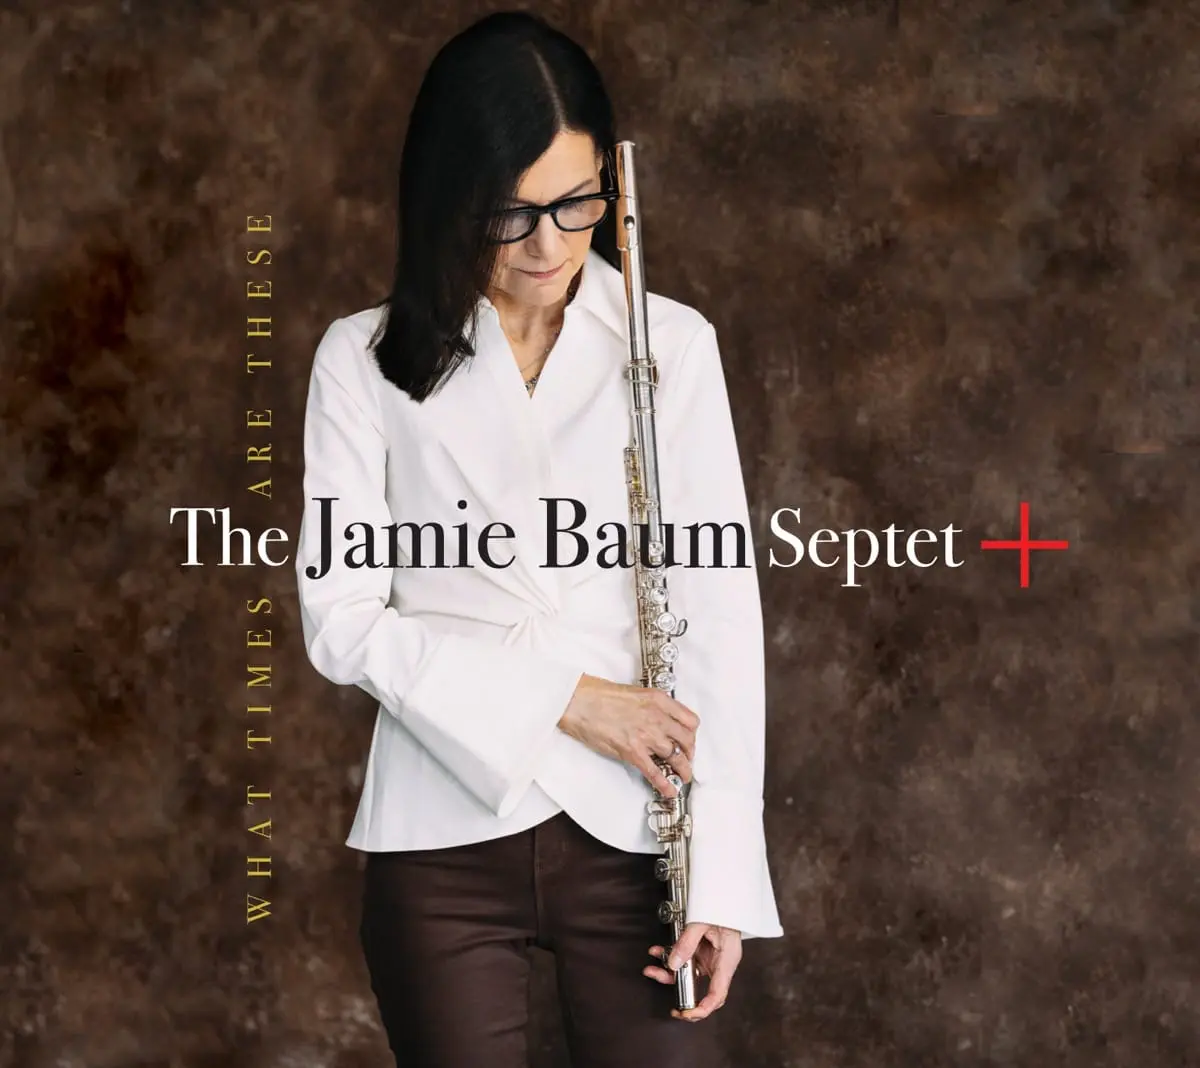 The Jamie Baum Septet+: What Times Are These